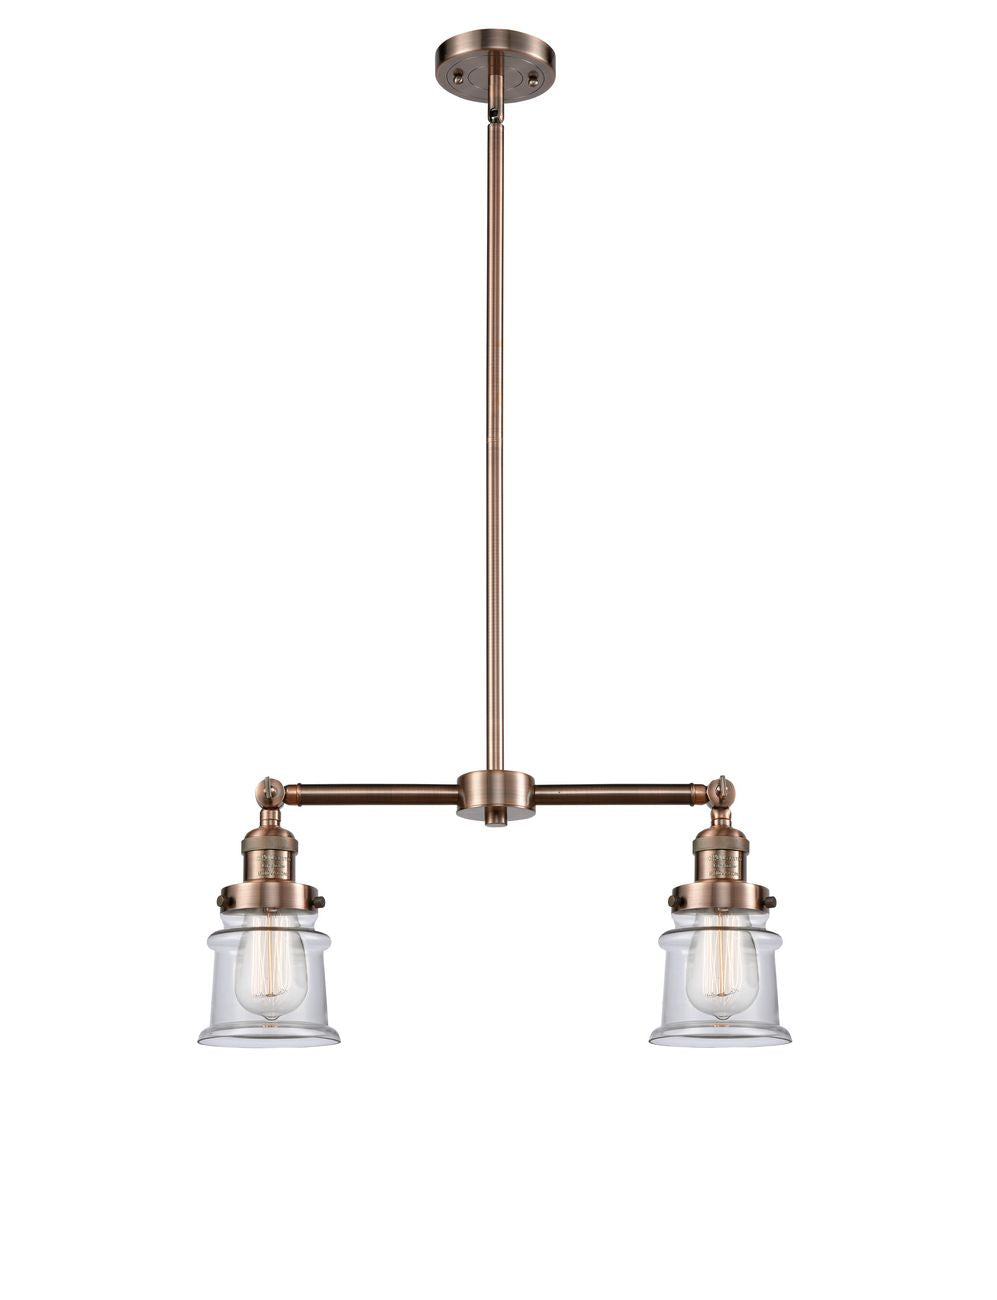 209-AC-G182S 2-Light 21" Antique Copper Island Light - Clear Small Canton Glass - LED Bulb - Dimmensions: 21 x 5 x 10<br>Minimum Height : 20.625<br>Maximum Height : 44.625 - Sloped Ceiling Compatible: Yes